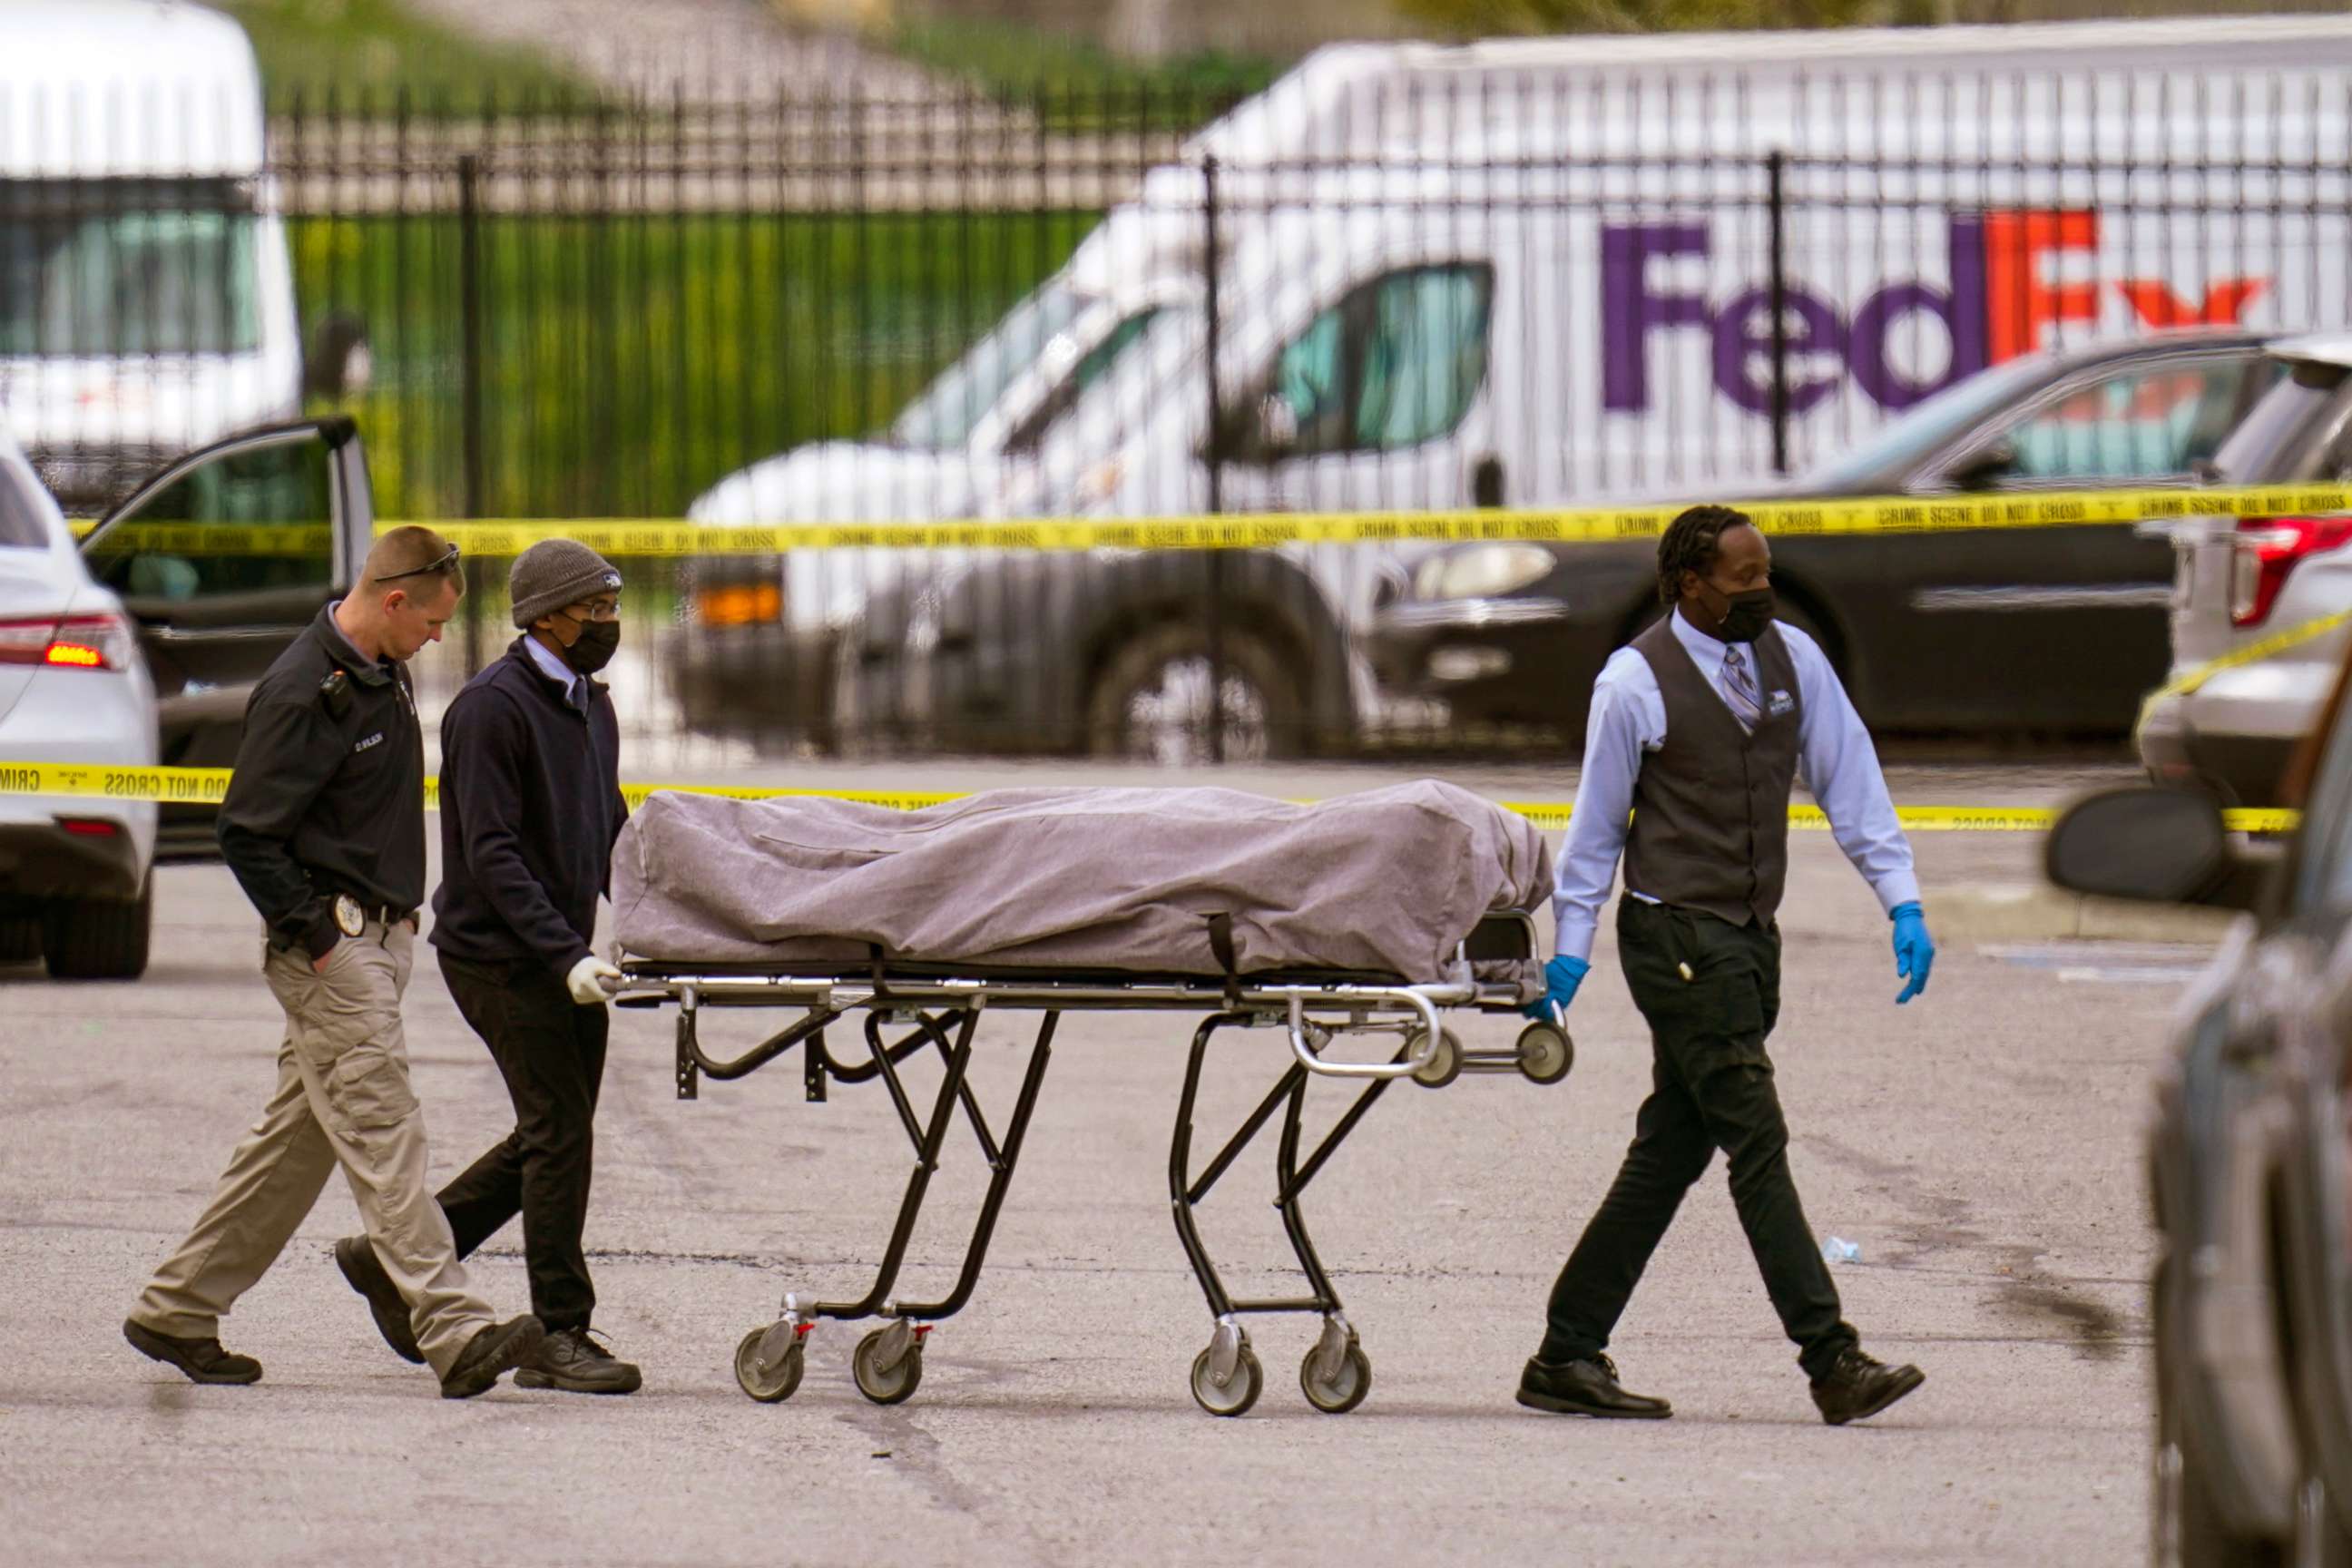 PHOTO: A body is taken from the scene where multiple people were shot at a FedEx Ground facility in Indianapolis, April 16, 2021.